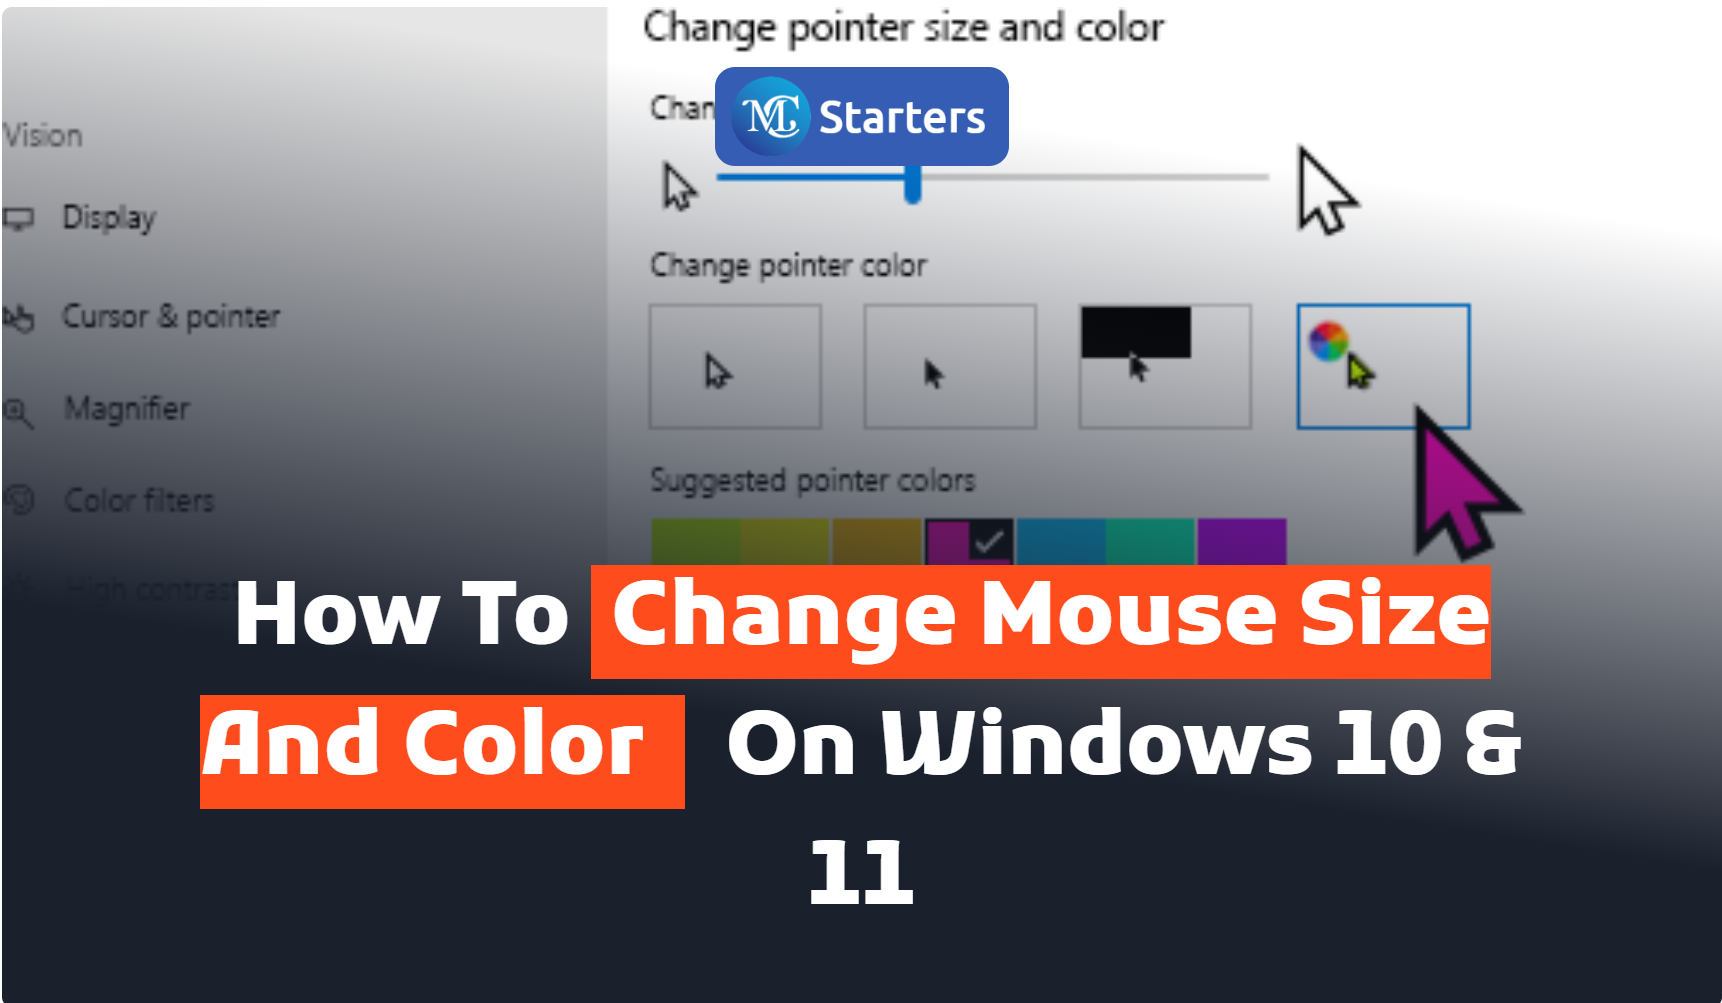 How to Change Mouse Size and Color in Windows 10?